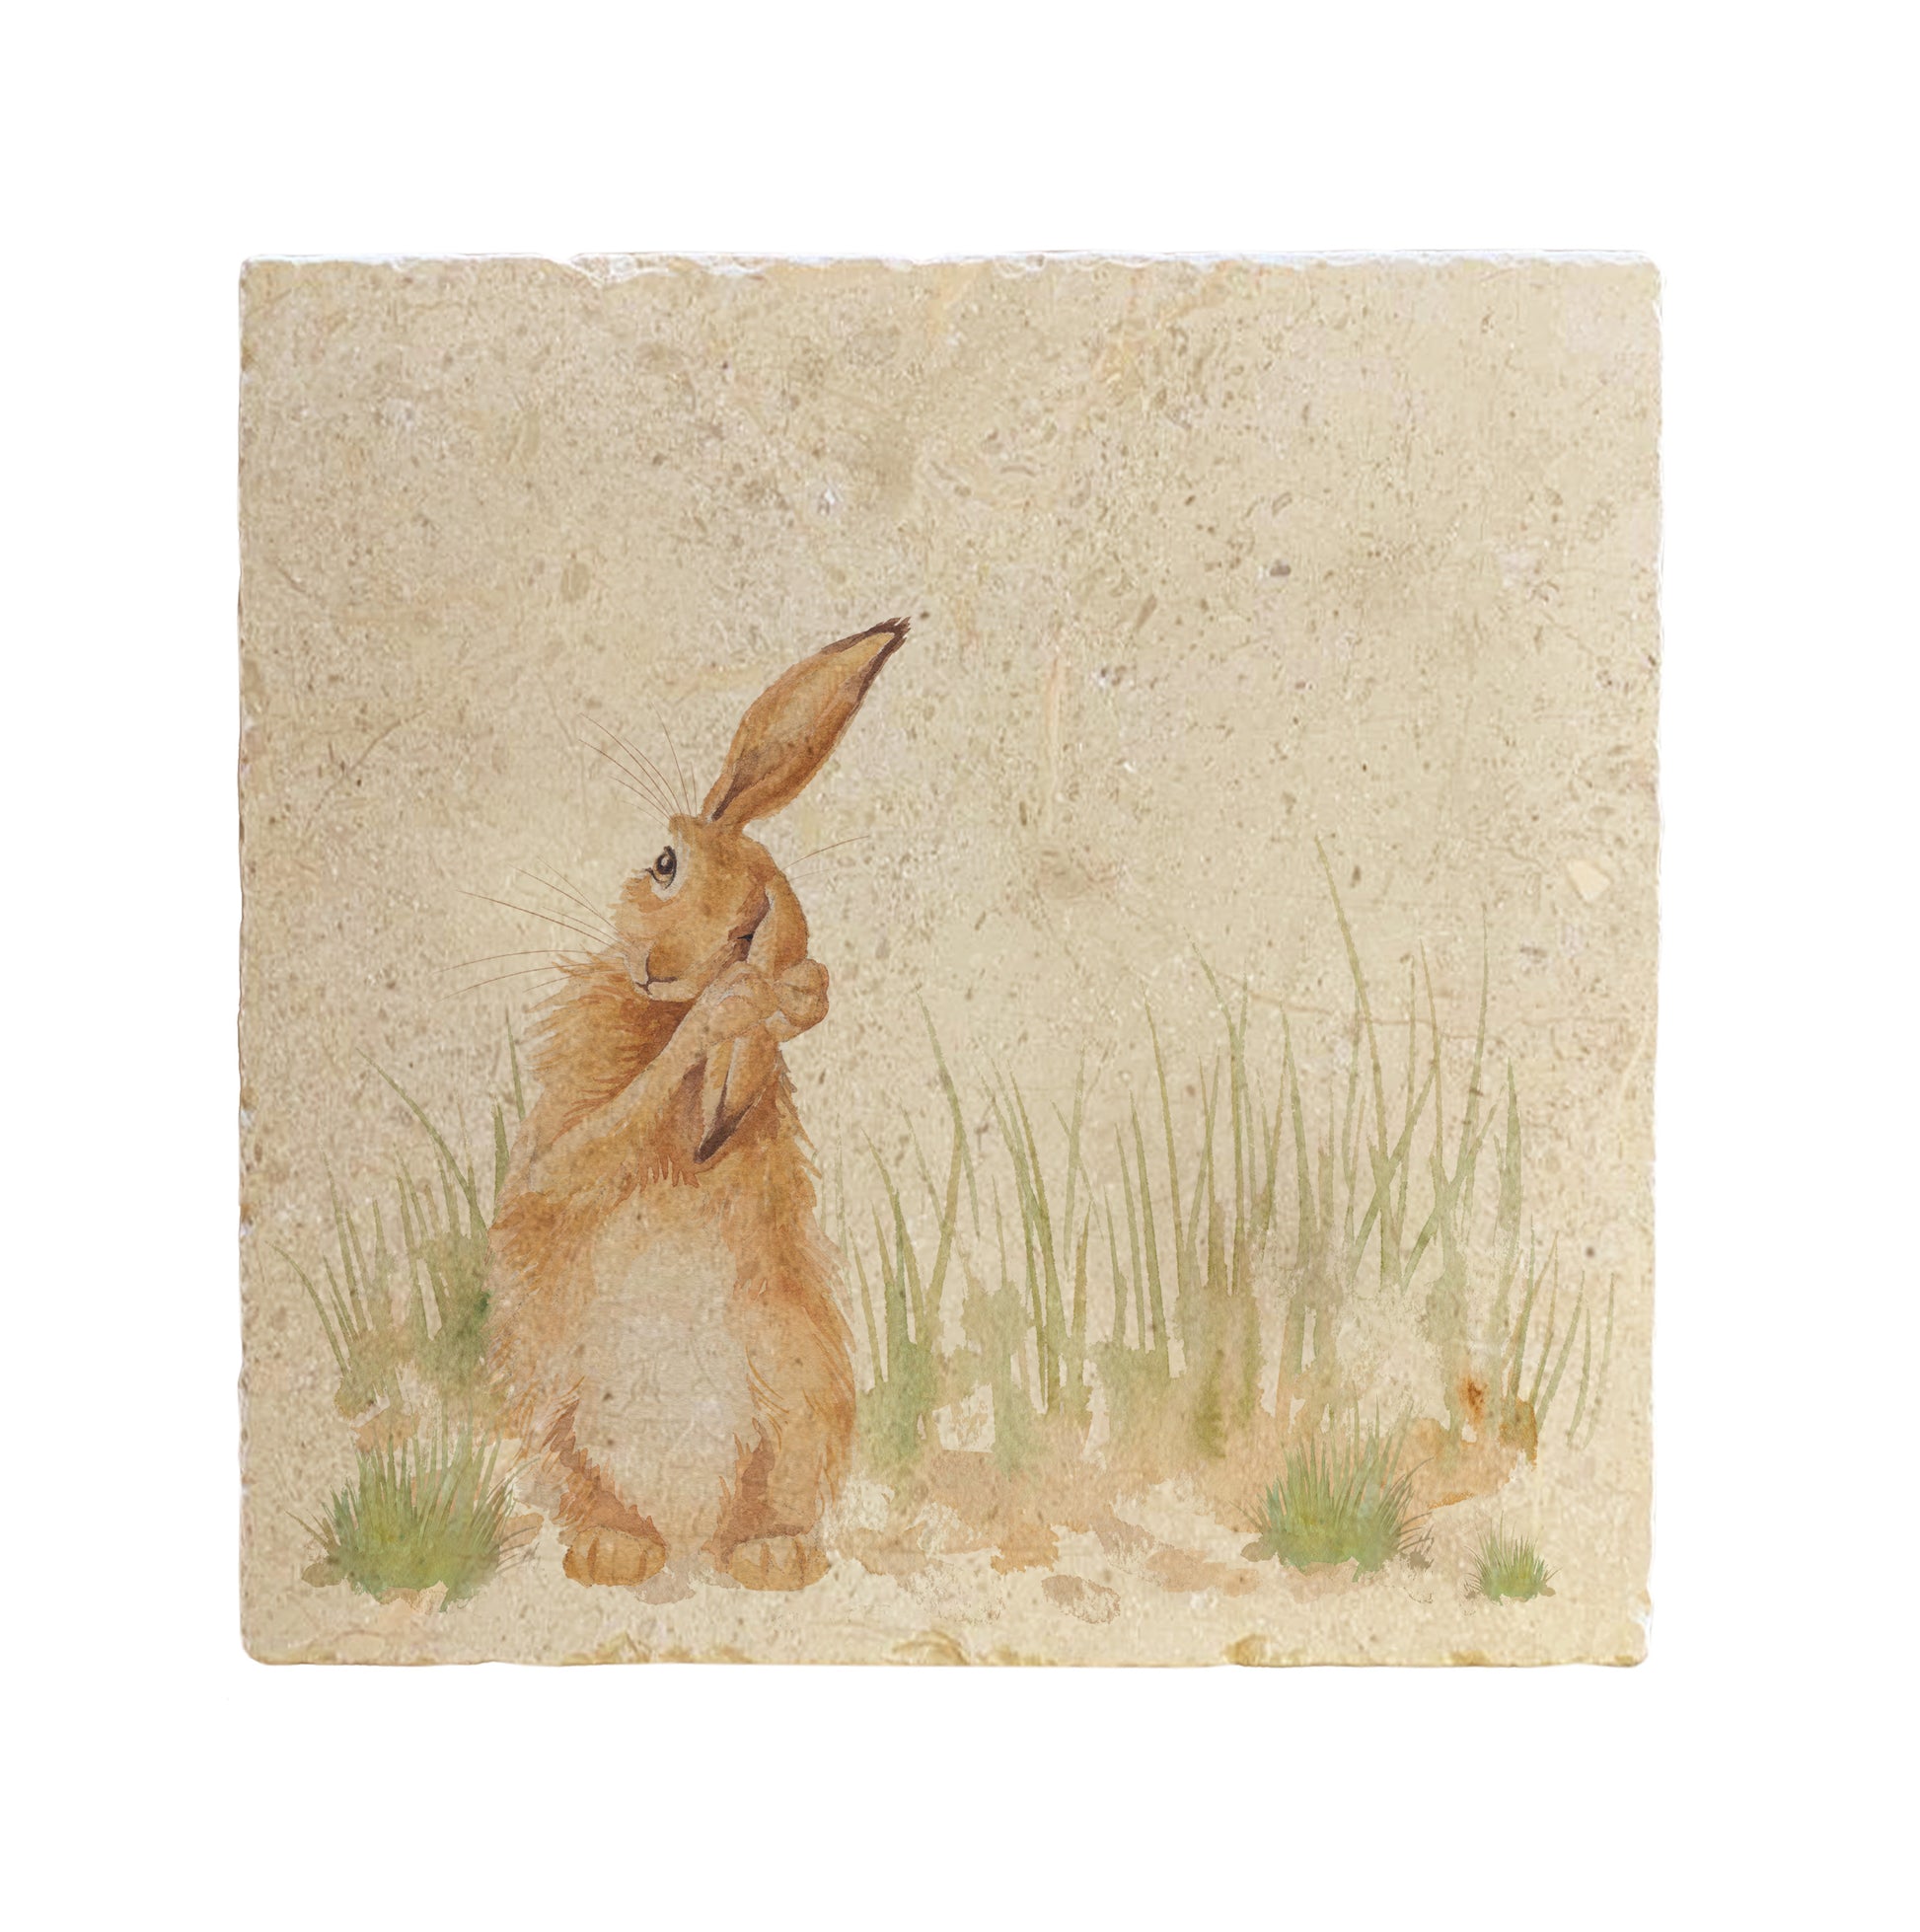 A square cream marble placemat featuring a watercolour countryside animal design of a hare in grass cleaning his ear.